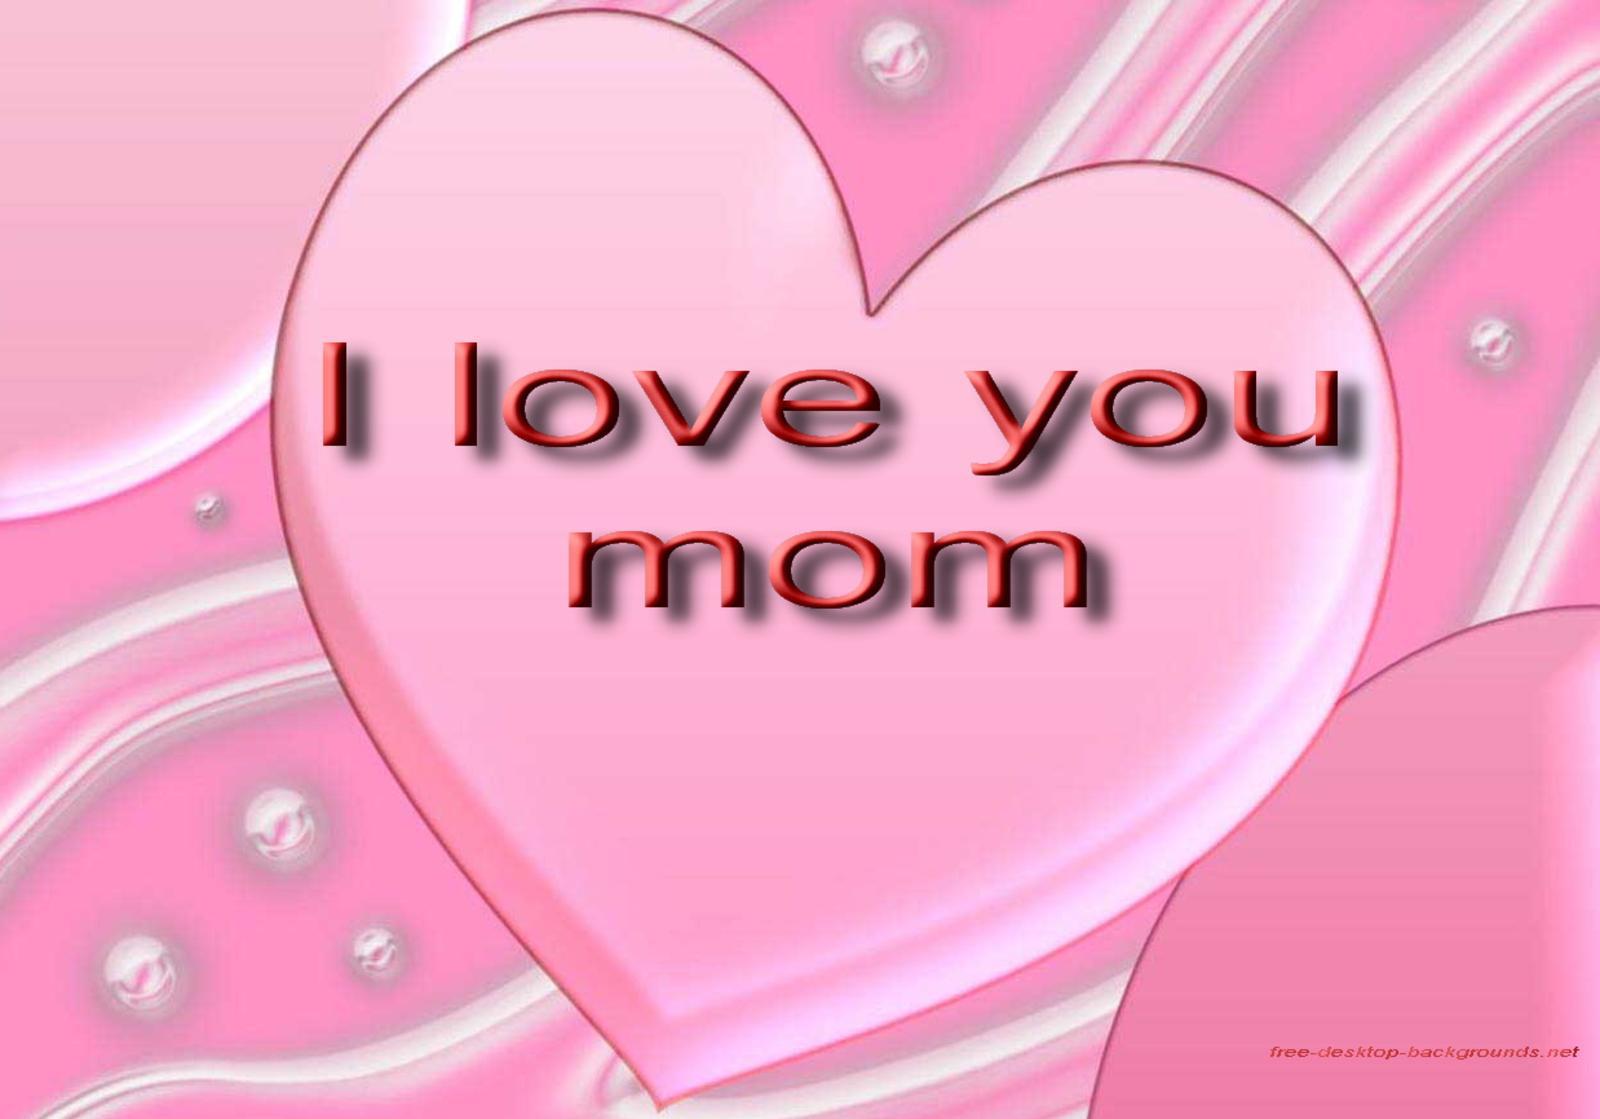 mother love wallpapers,heart,pink,love,text,valentine's day